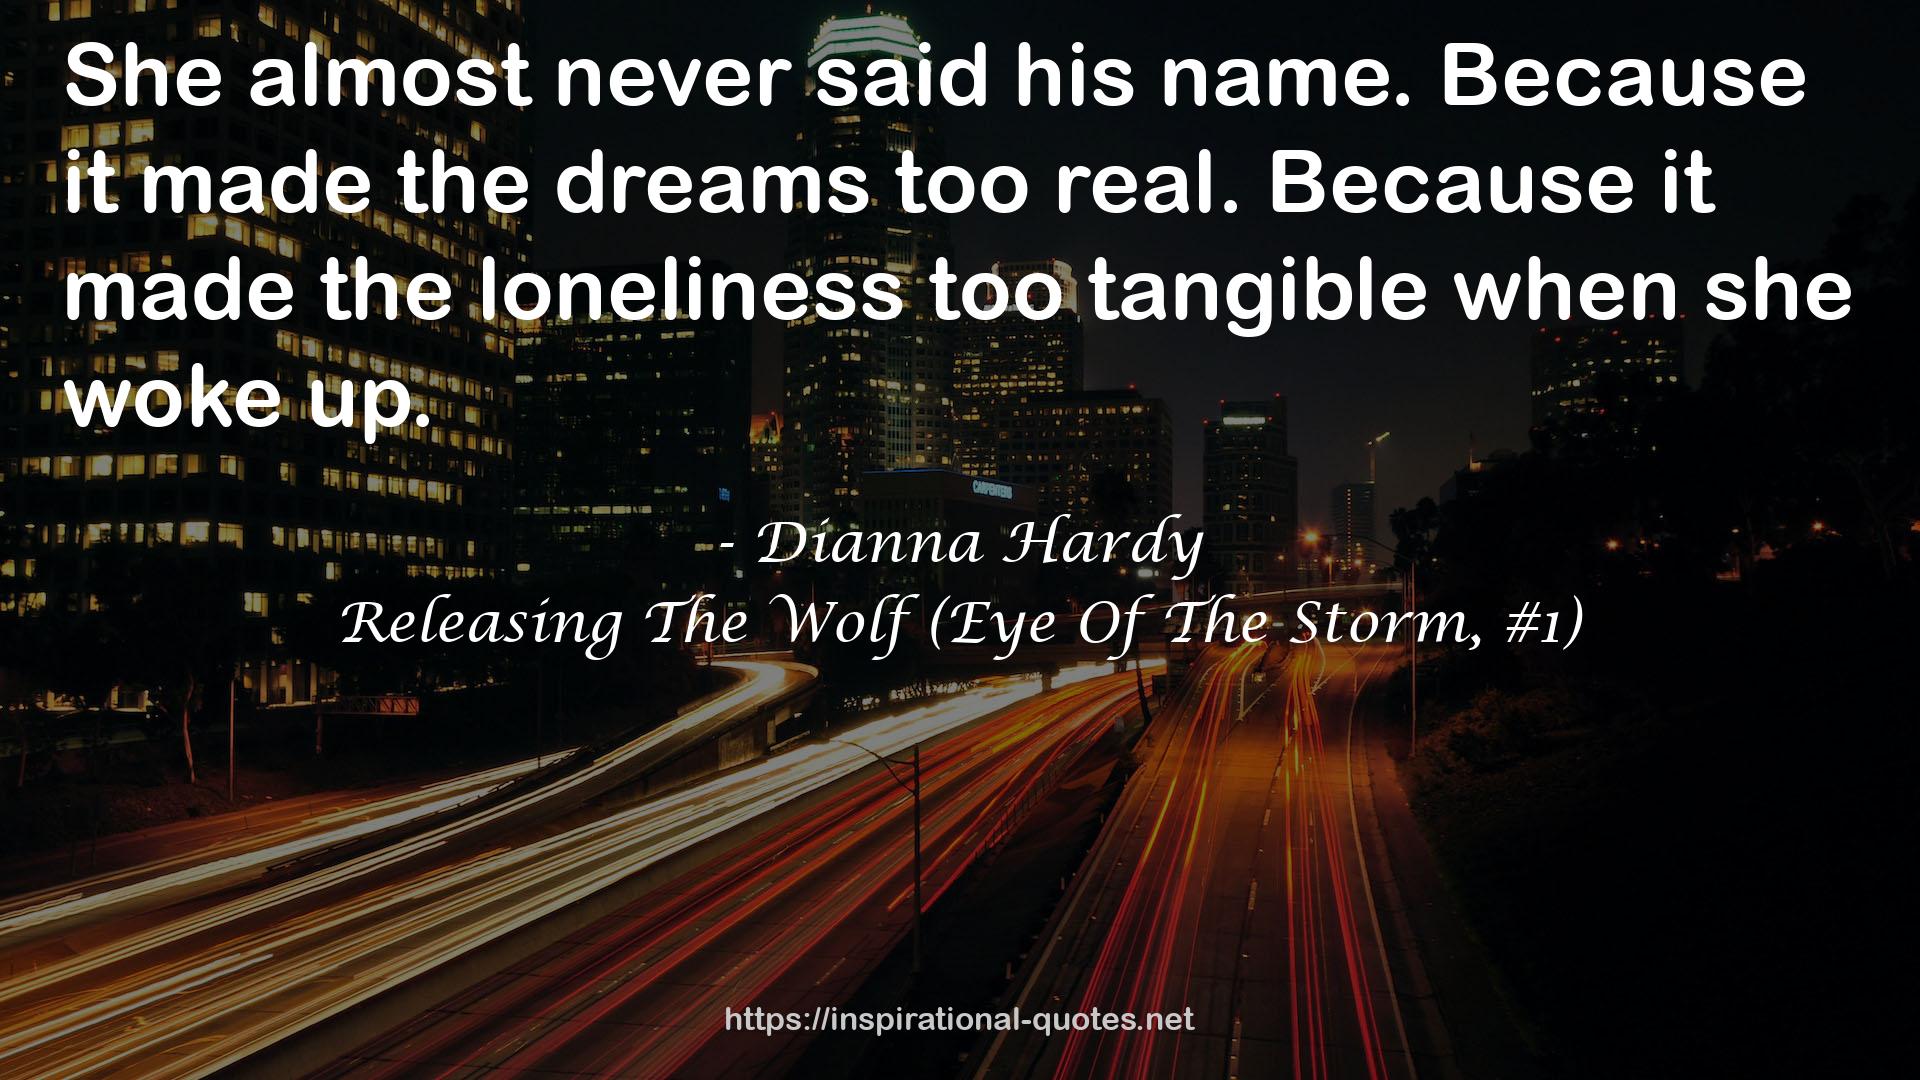 Releasing The Wolf (Eye Of The Storm, #1) QUOTES